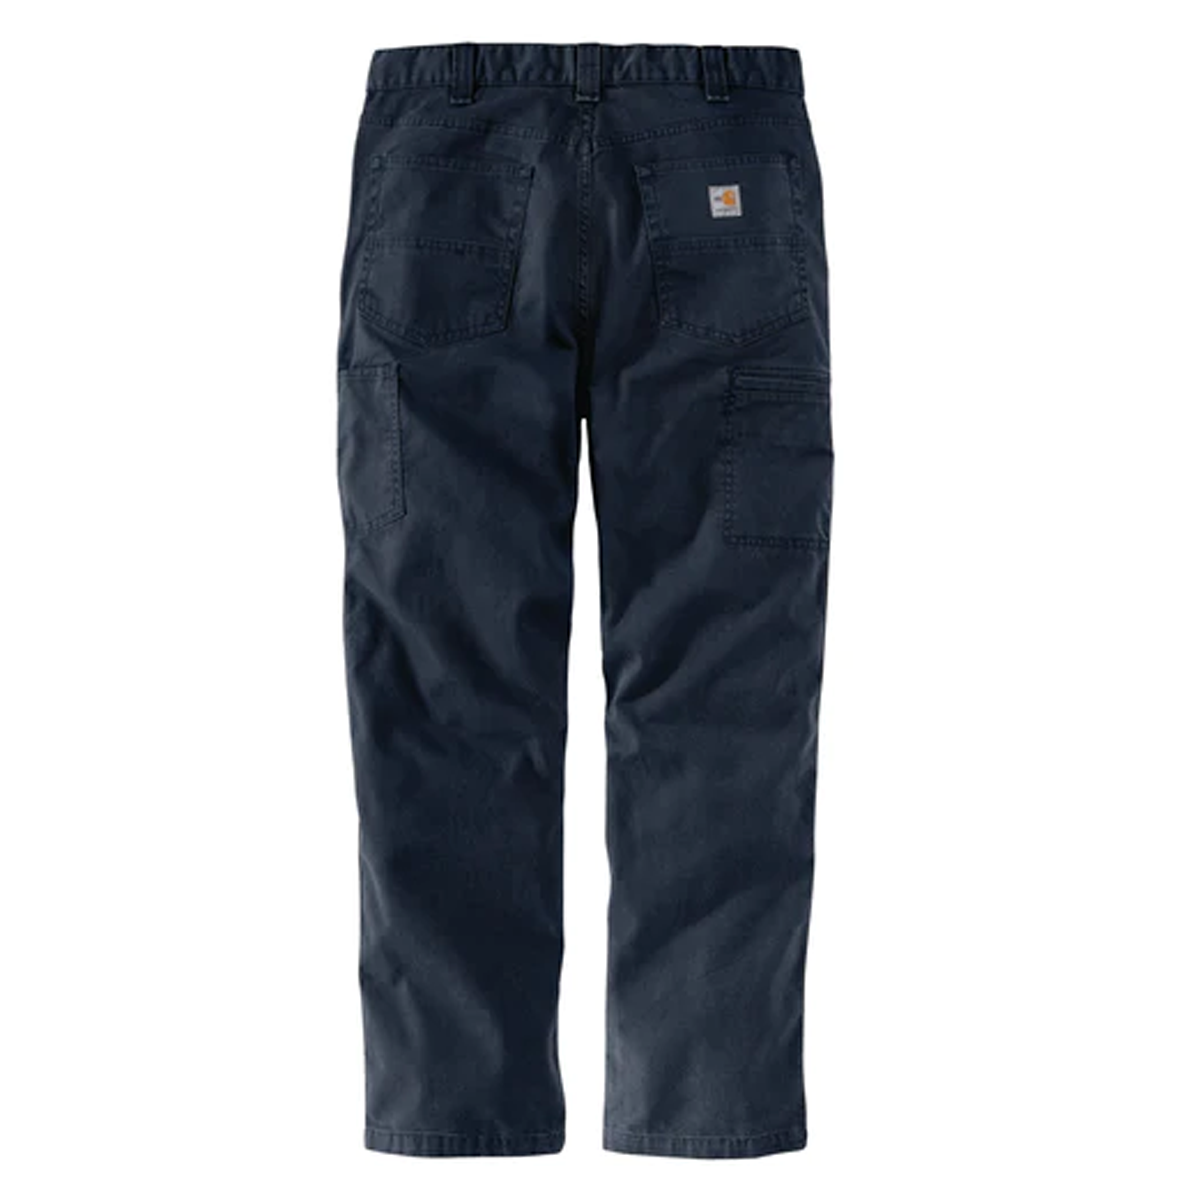 CARHARTT FR RUGGED FLEX RELAXED FIT CANVAS WORK PANT